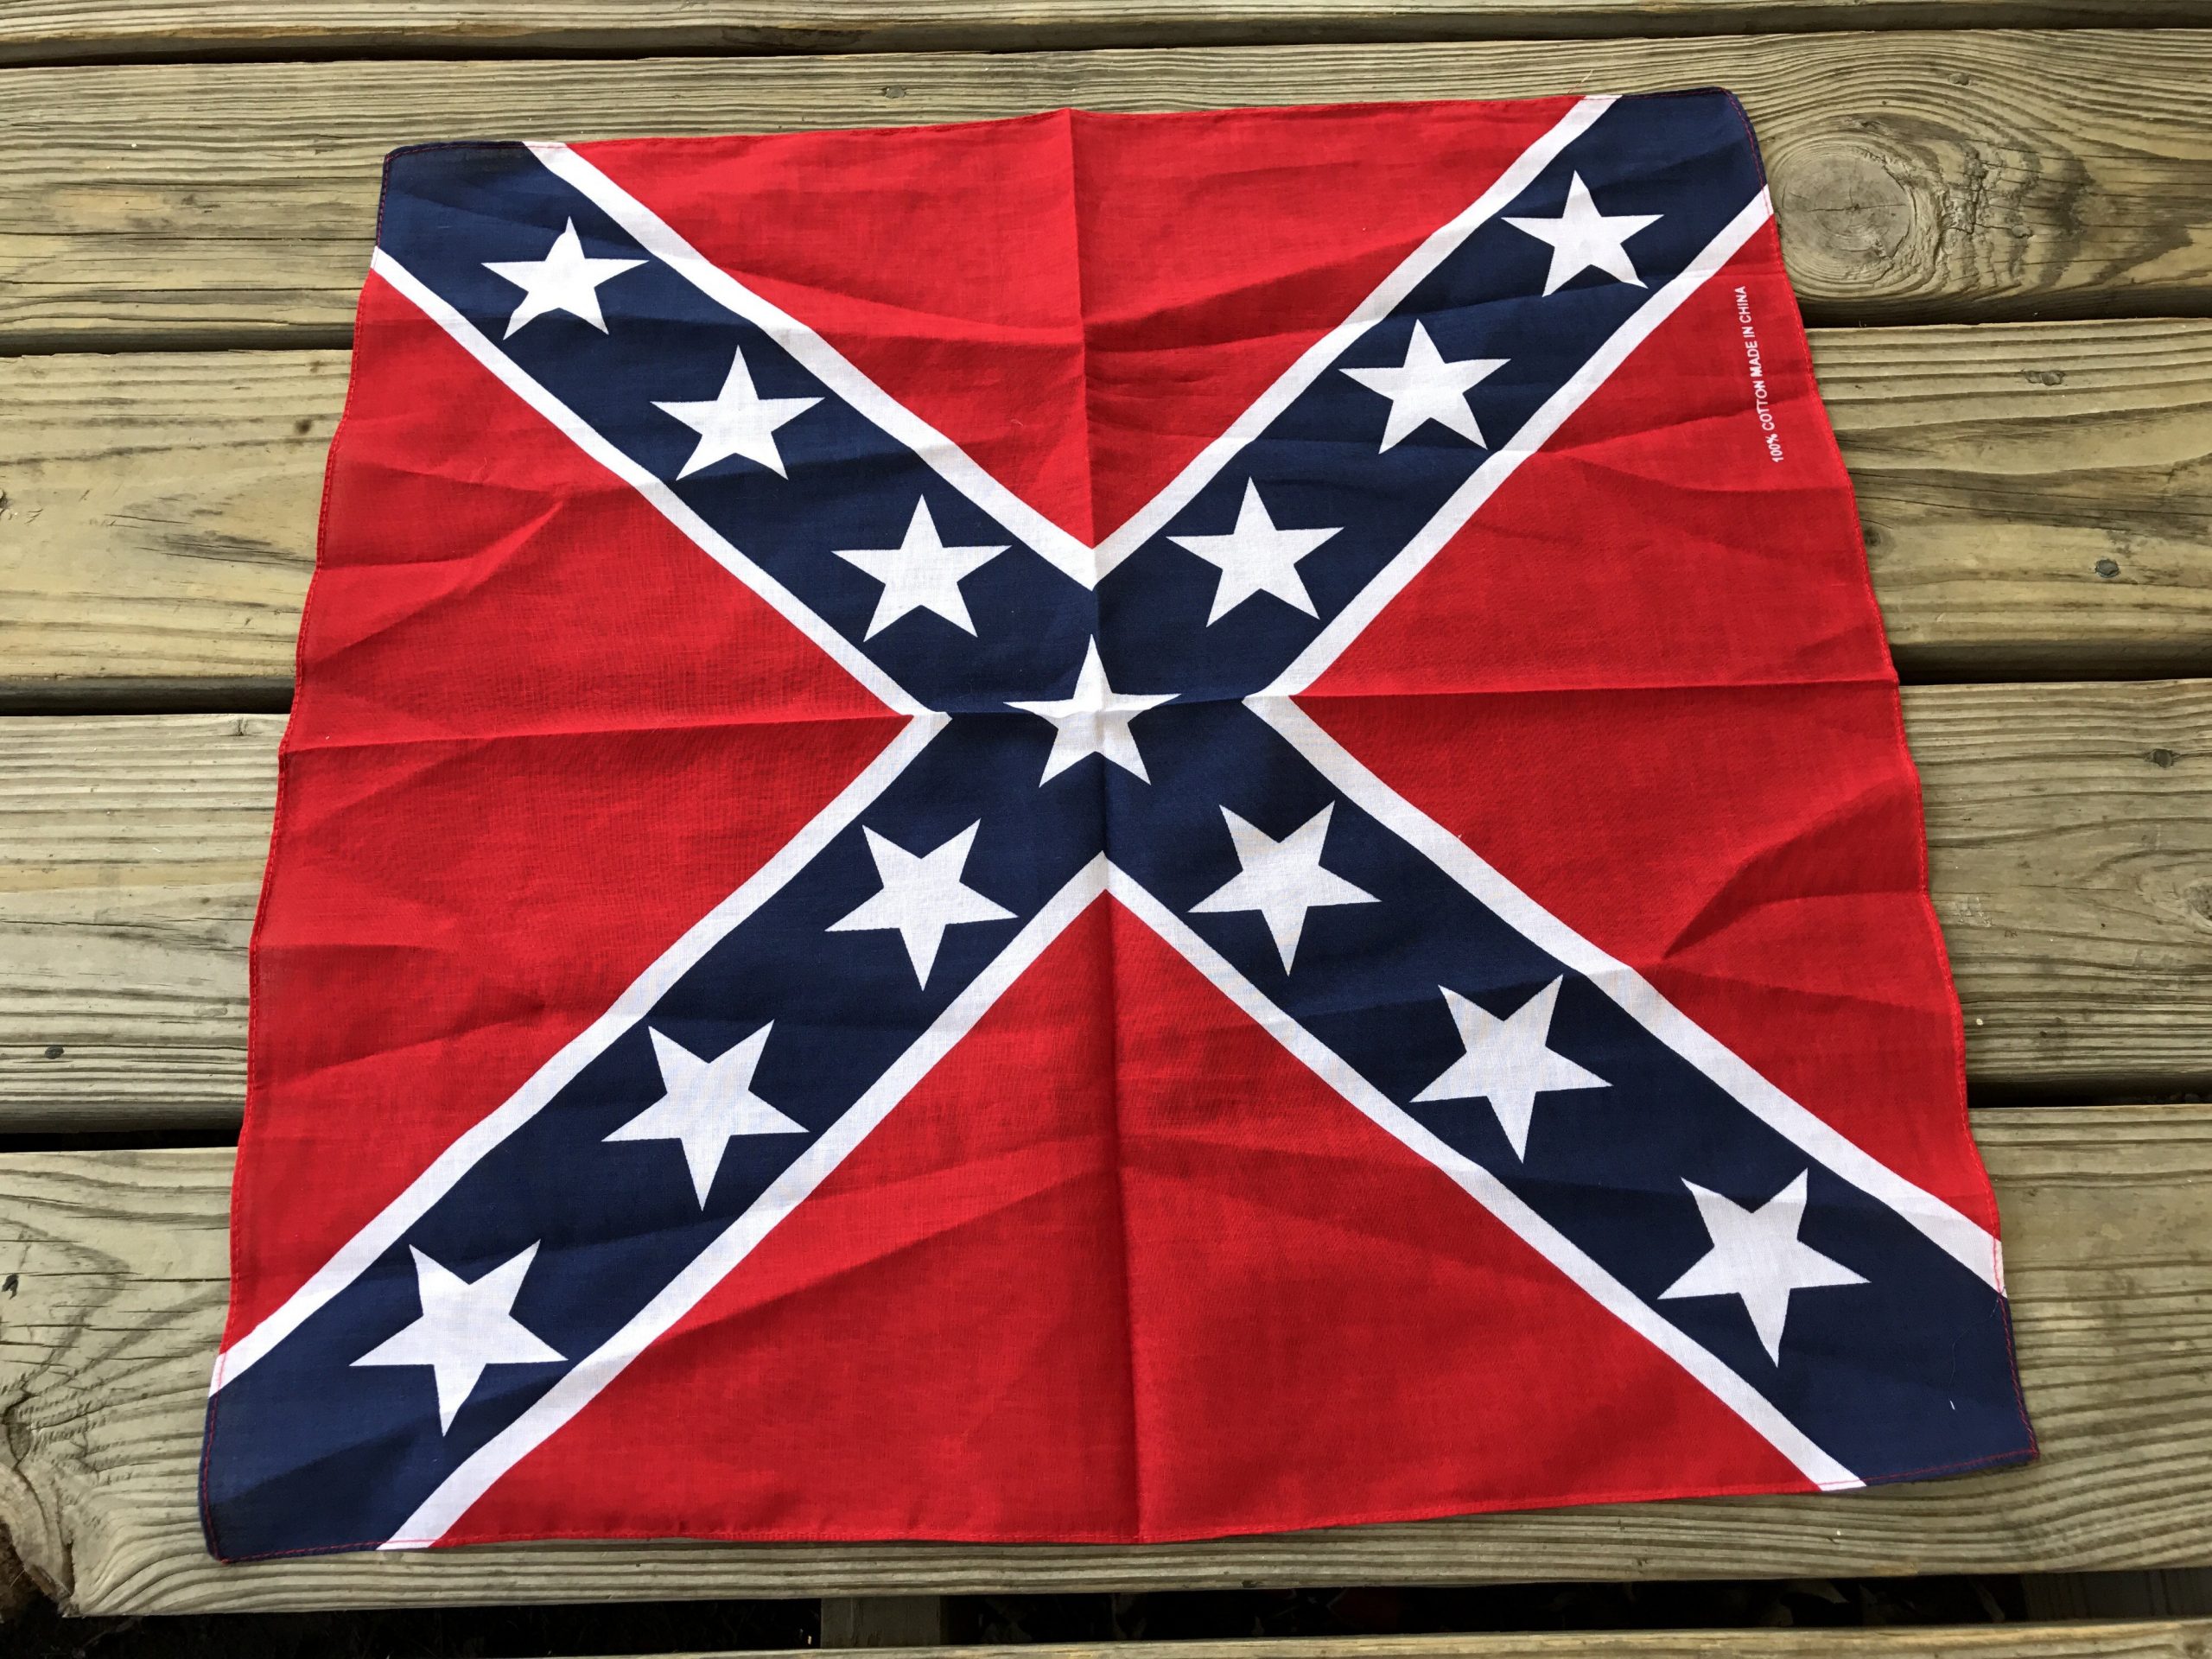 Confederate Flag Quilt For Sale / Confederate bedding set, blankets, bed .....